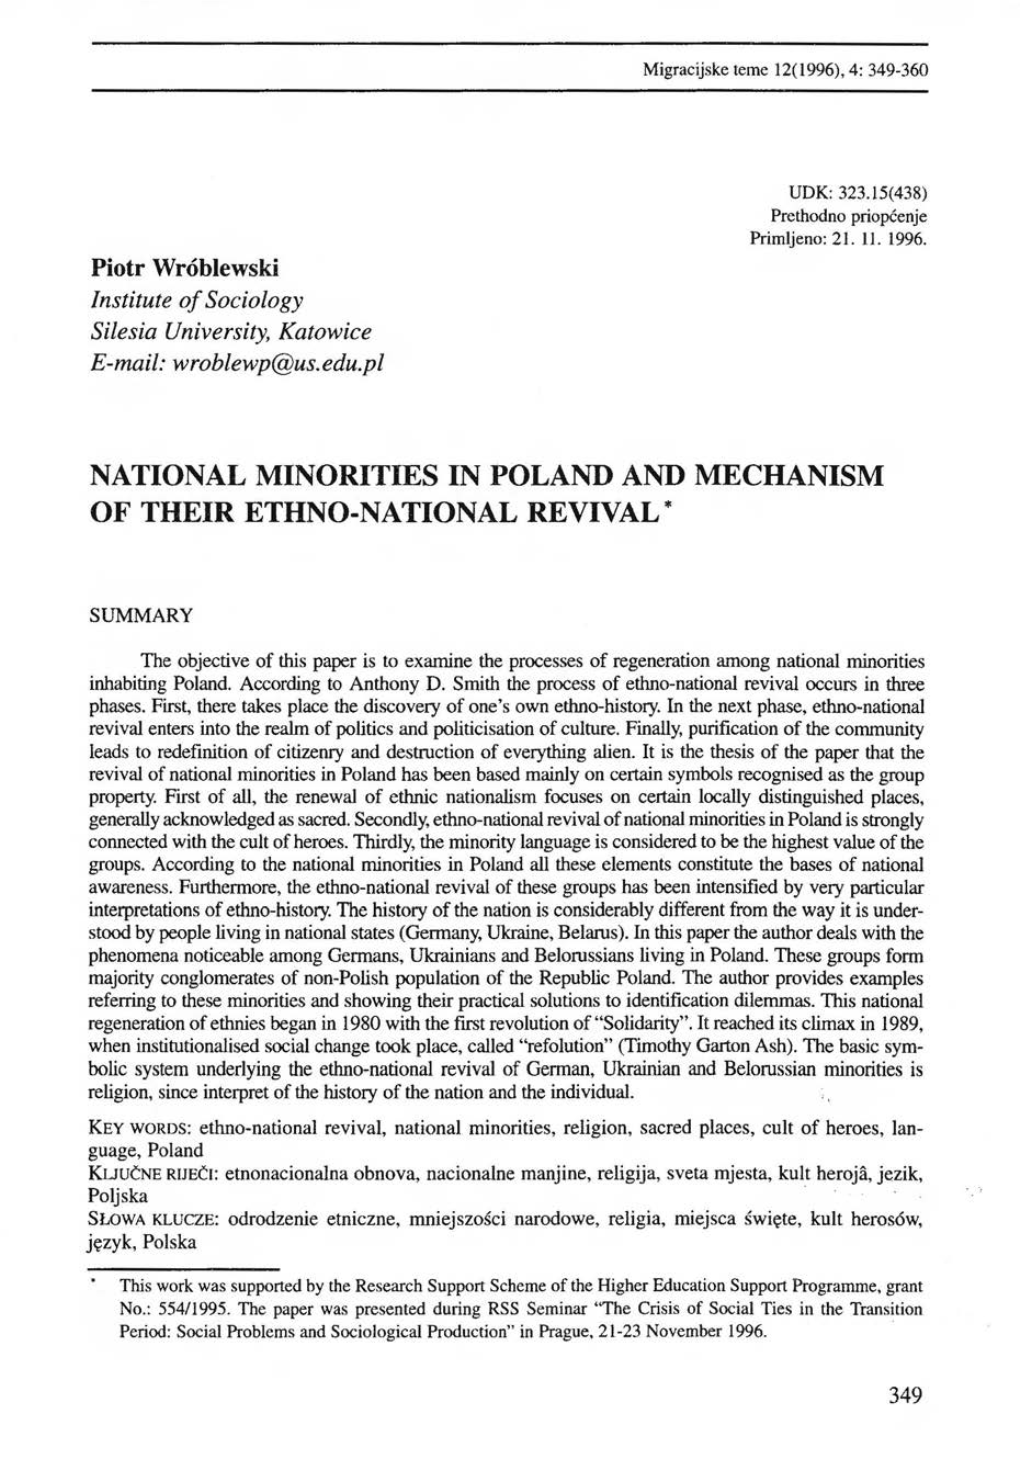 National Minorities in Poland and Mechanism of Their Ethno-National Revival*